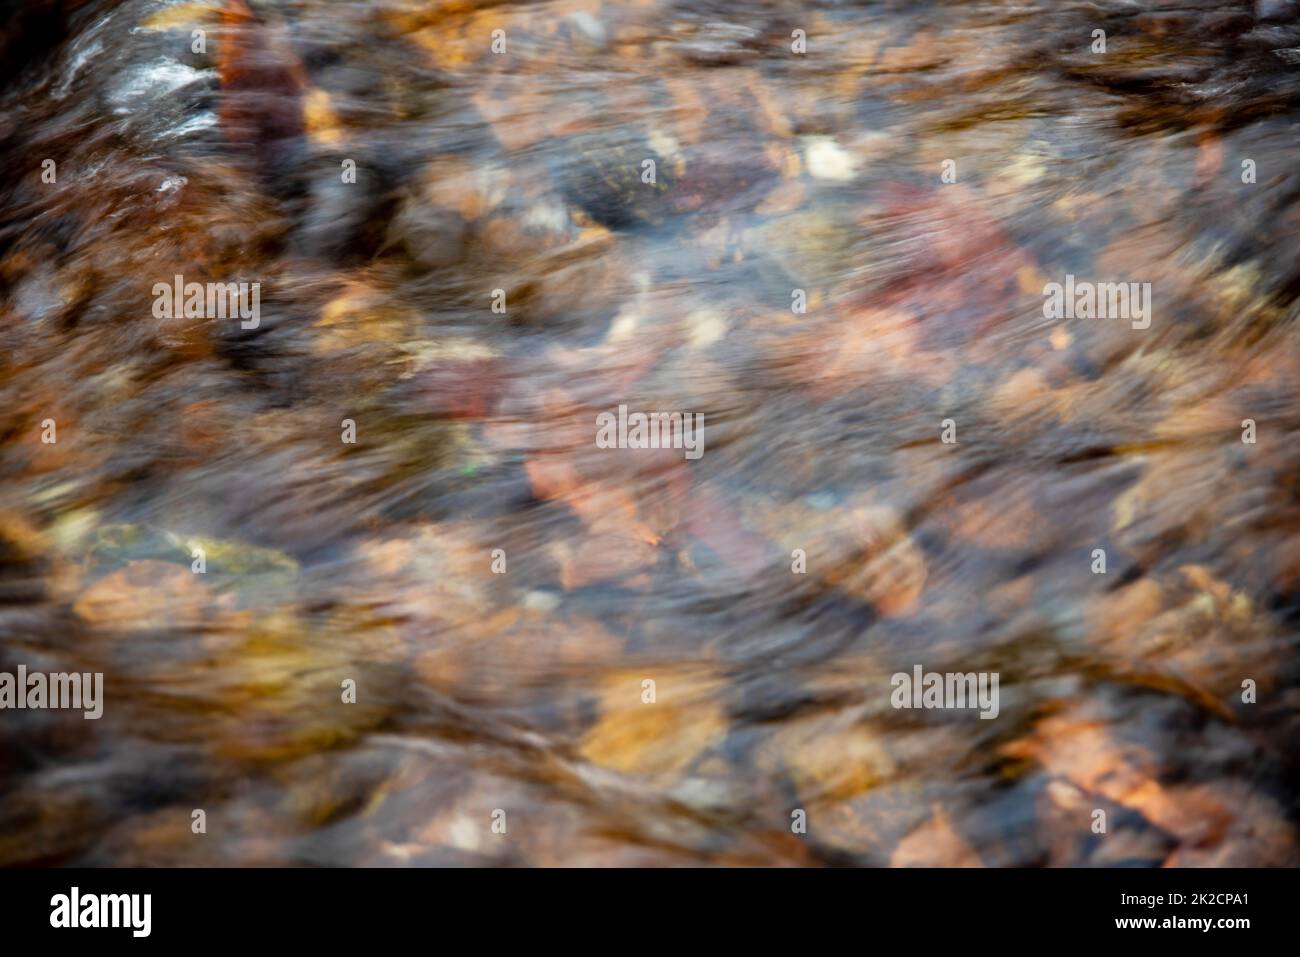 High angle view of shallow flowing stream over colorful stones Stock Photo